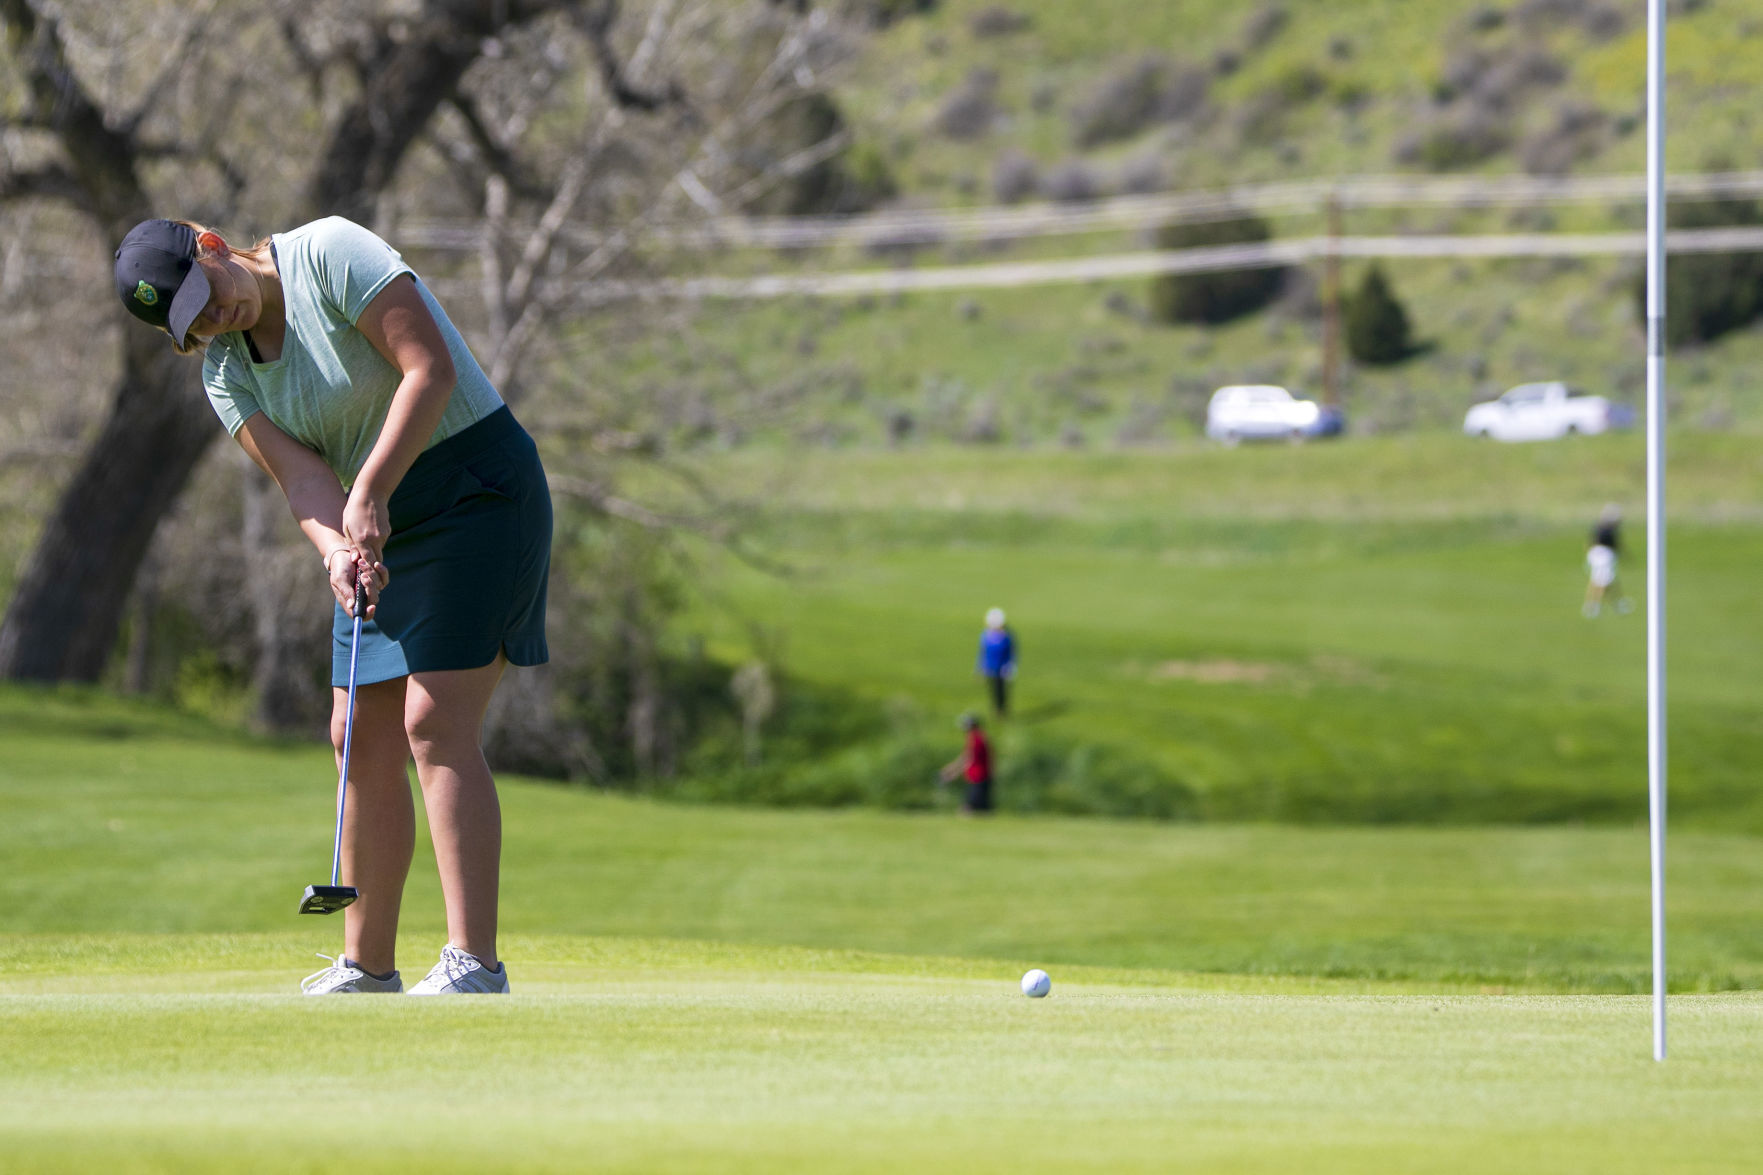 Top contenders chase hardware this week at Womens State Amateur in Great Falls